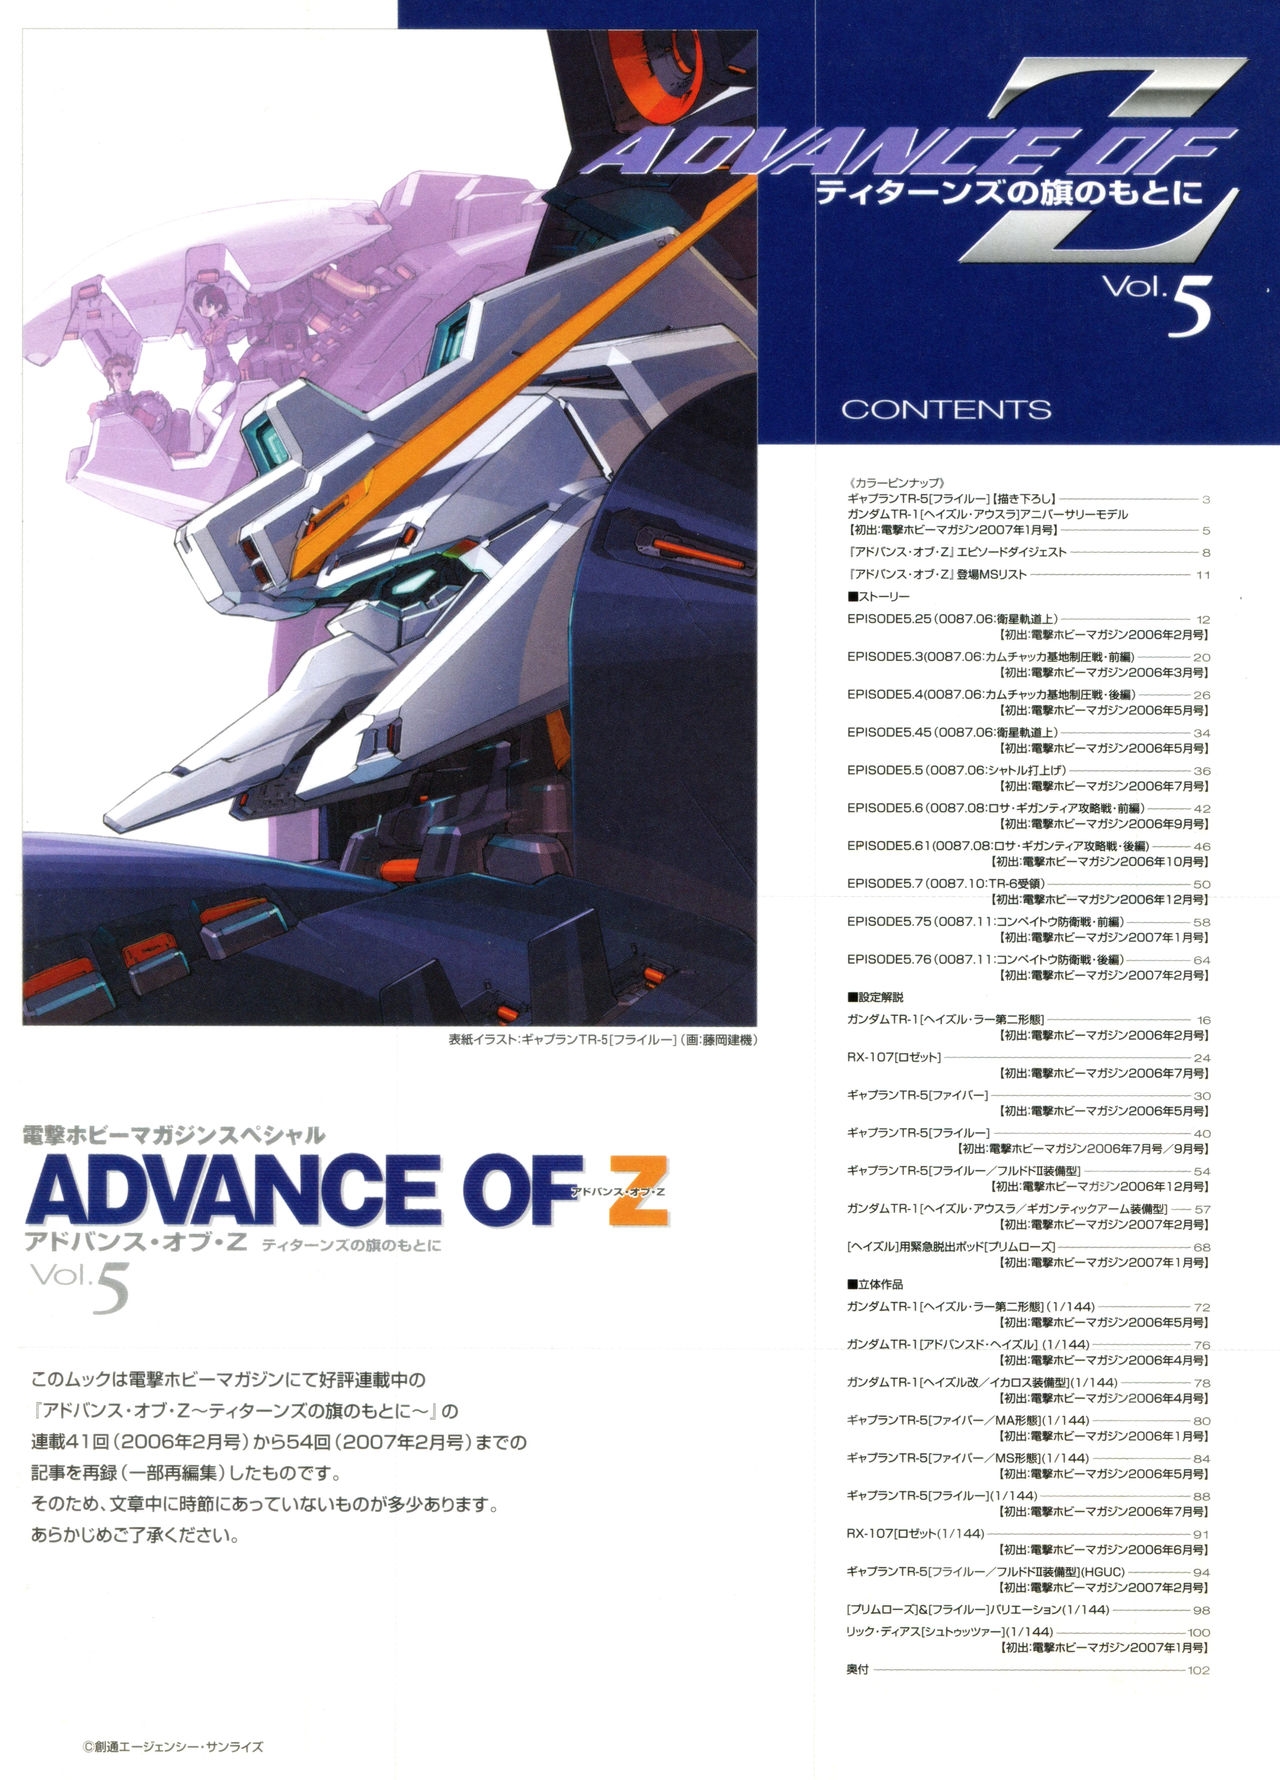 Advance of Z - The Flag of Titans Vol.5 3